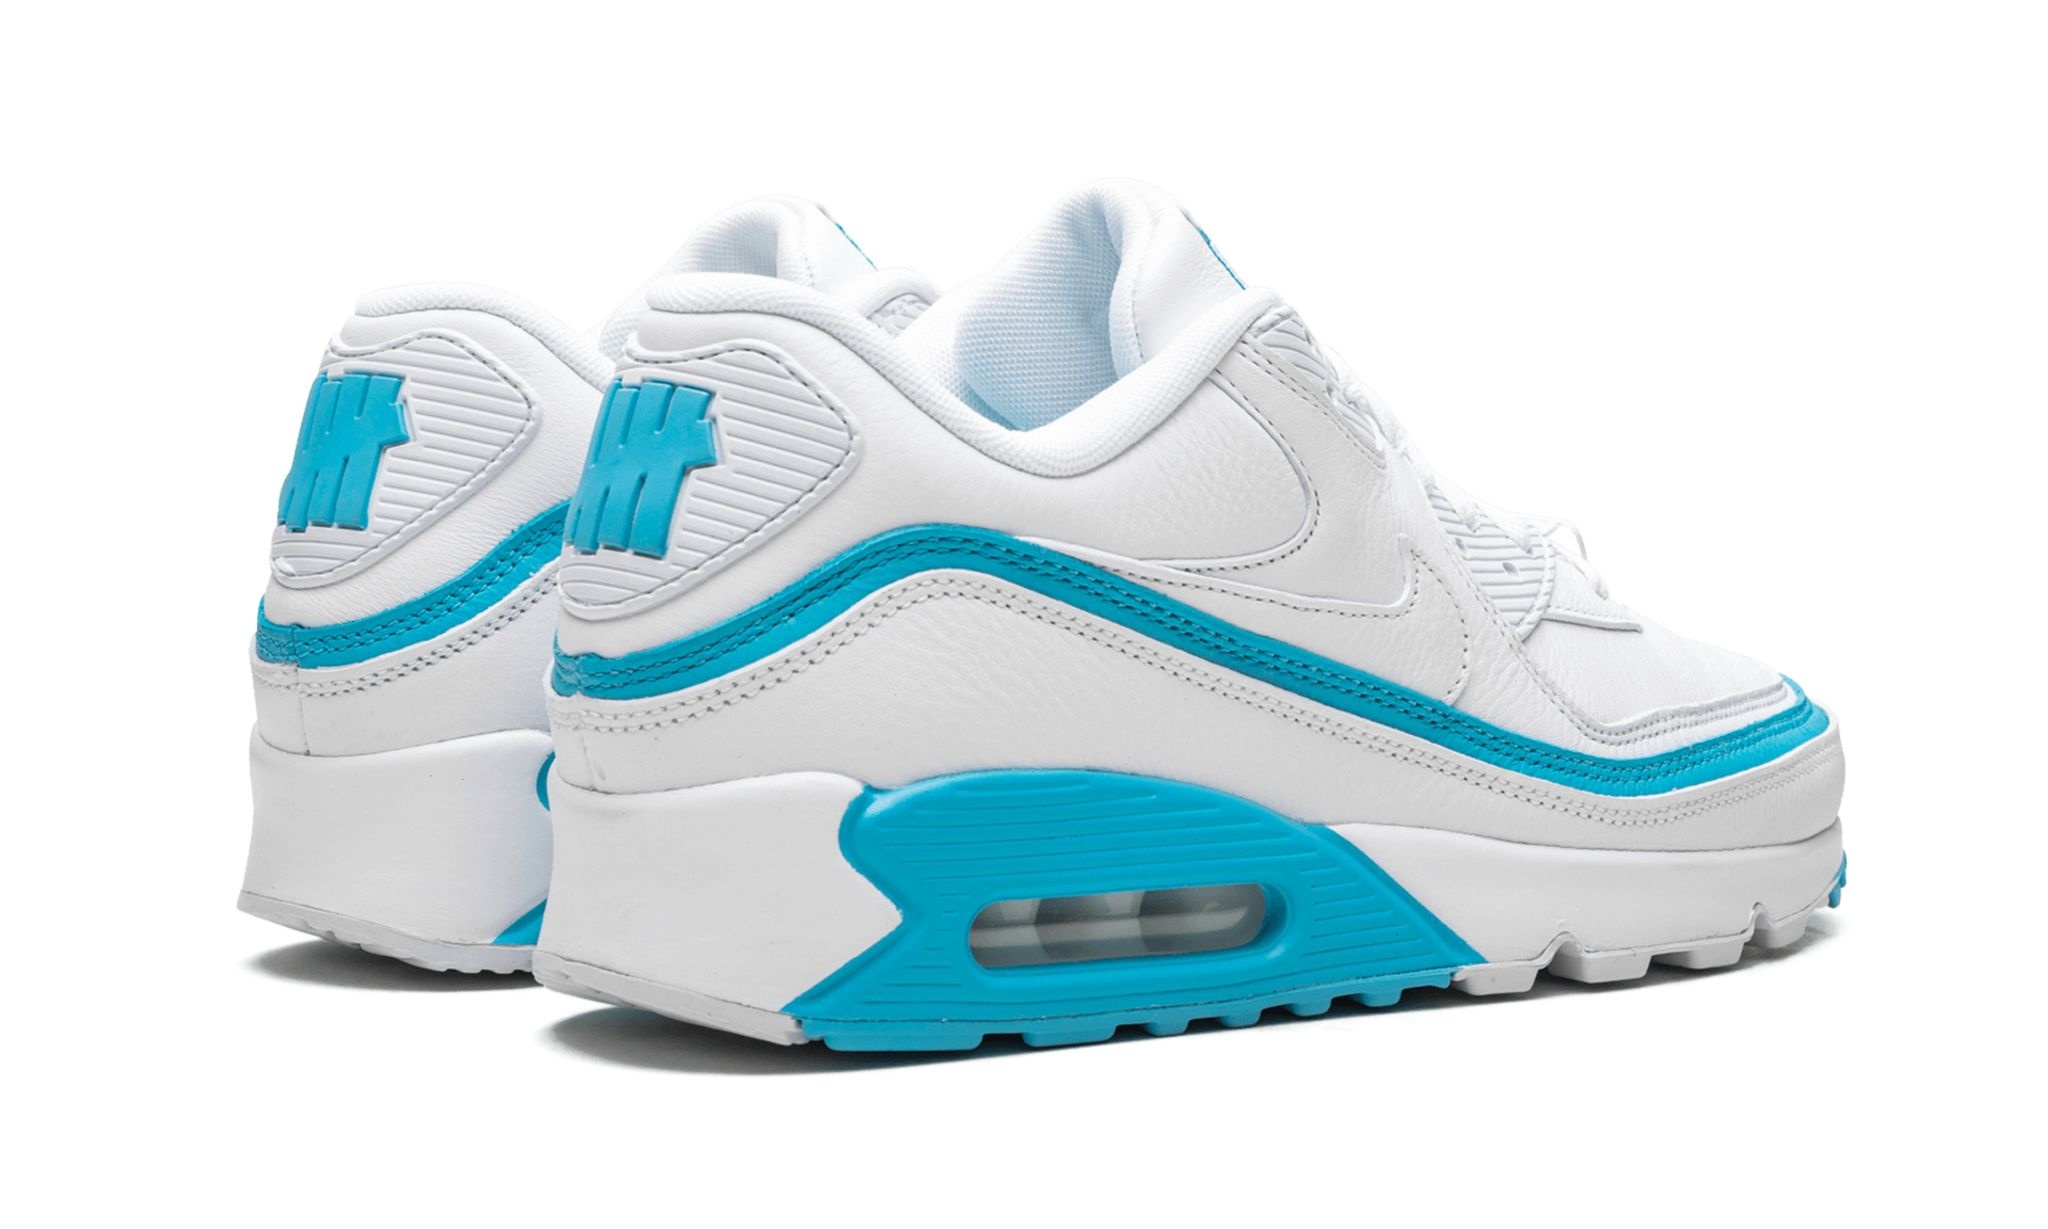 Air Max 90 / UNDFTD "Undefeated - White/Blue Fury" - 3